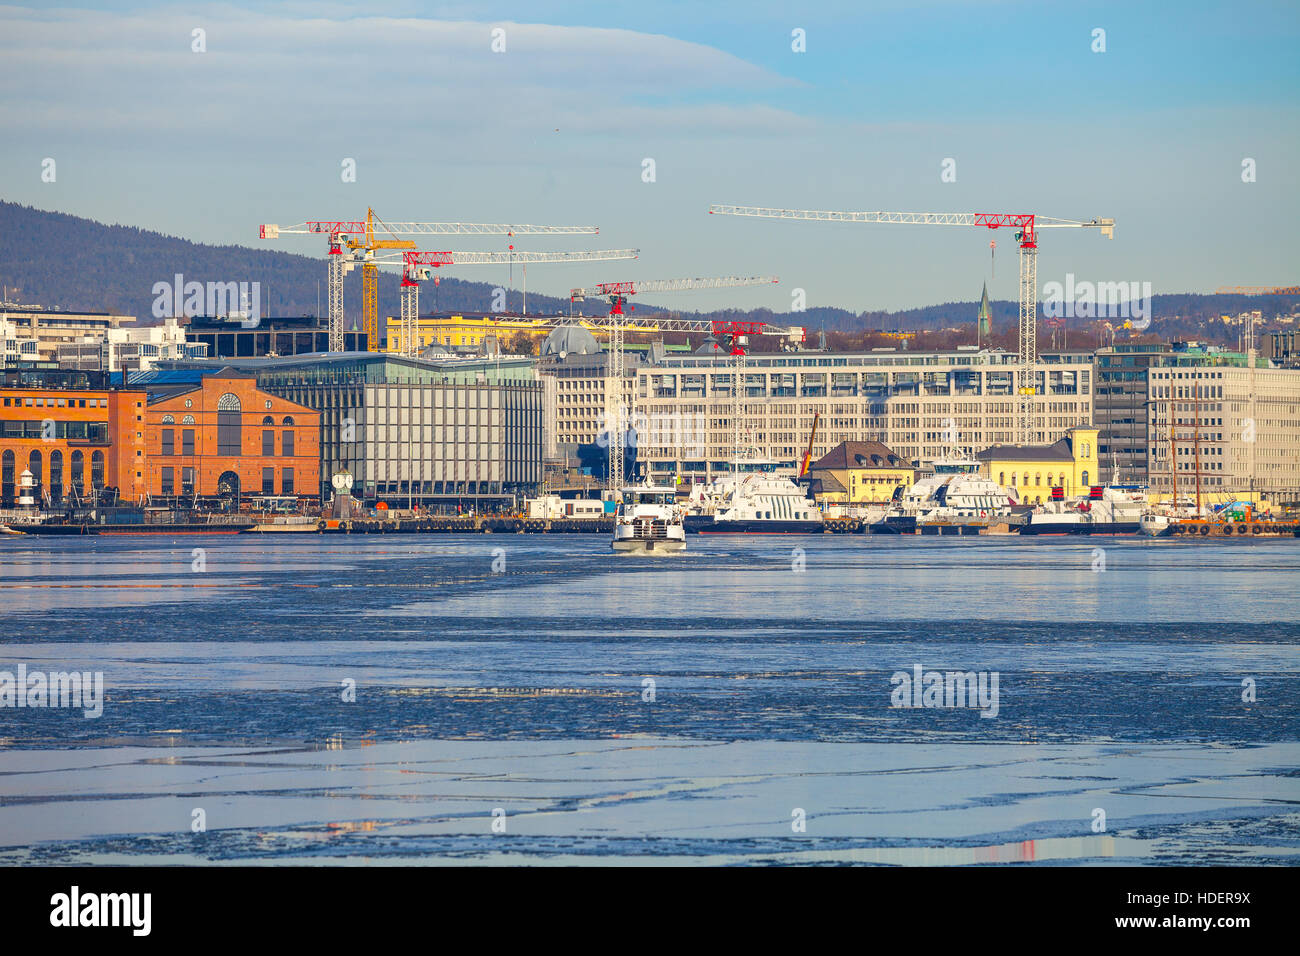 View of the Aker Brygge, modern part of Oslo. Marina and buildings. Stock Photo